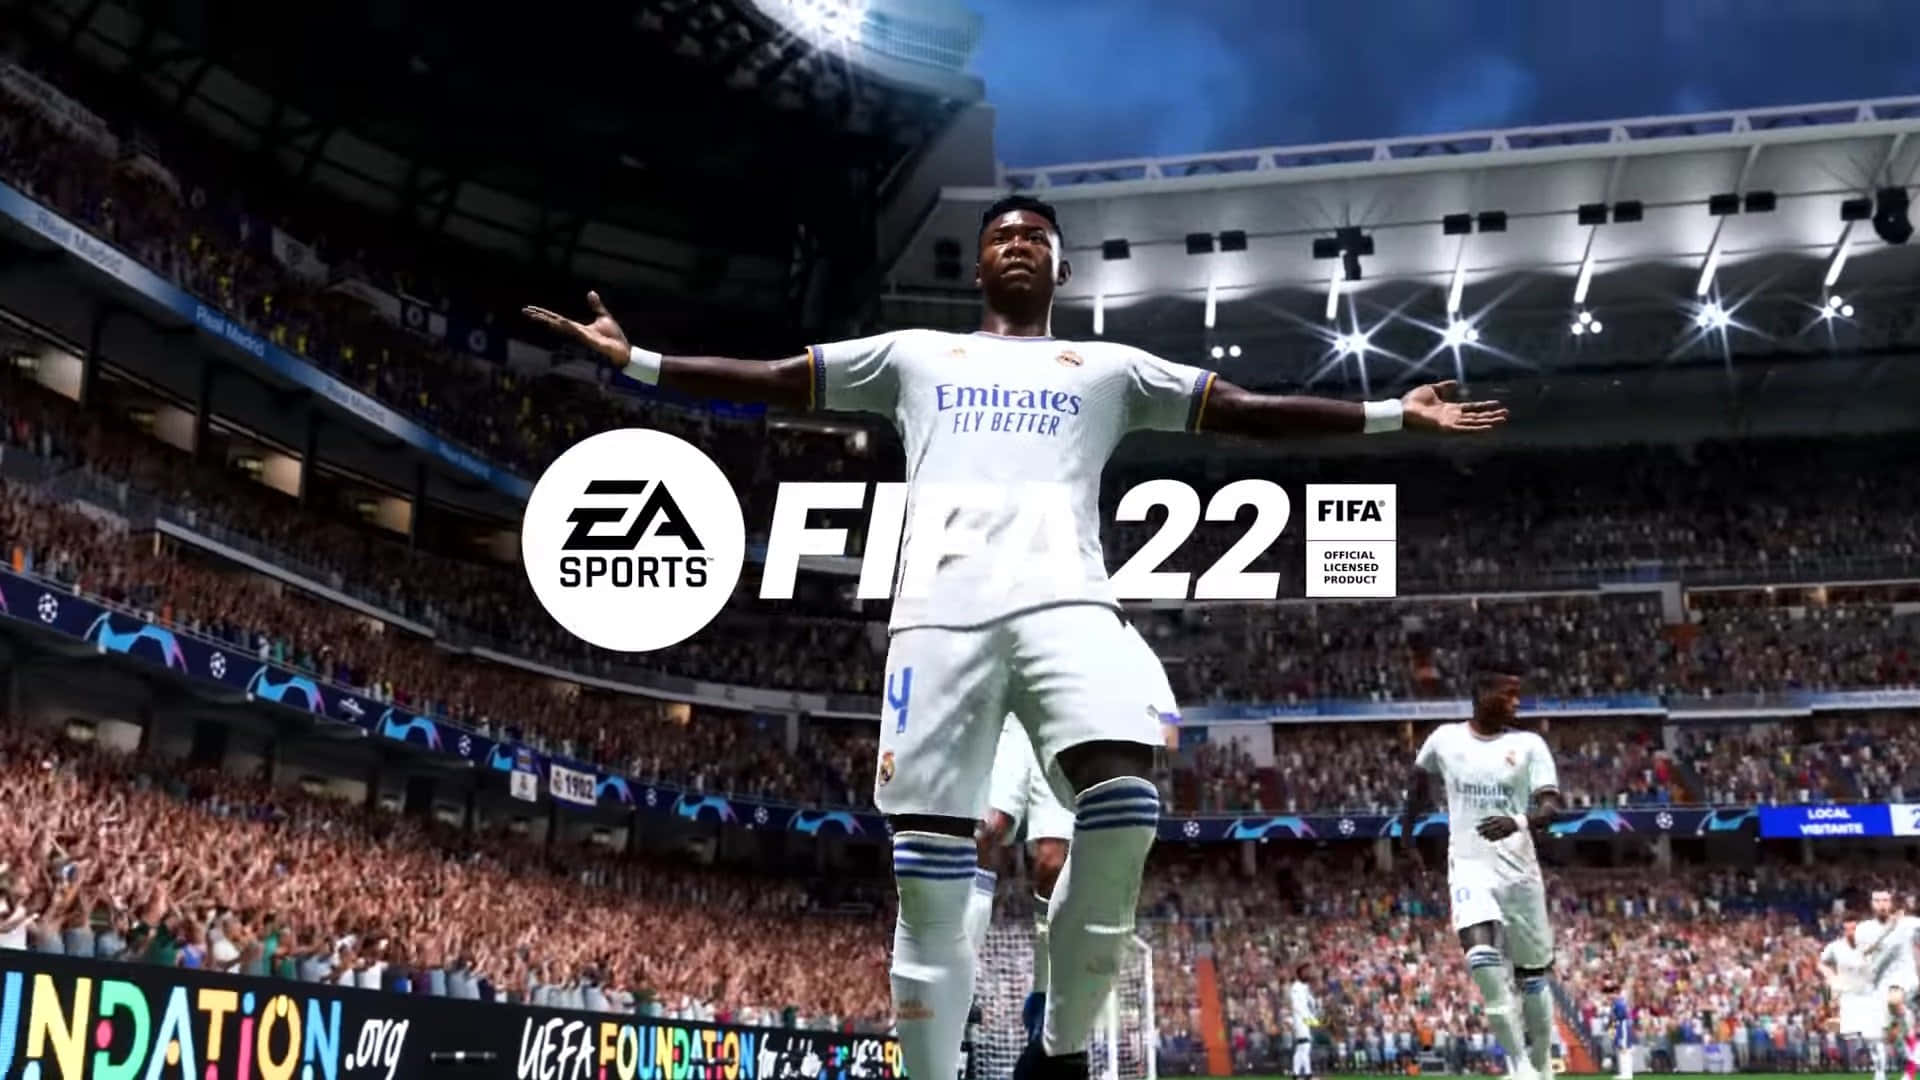 Exciting FIFA 22 Gameplay Action Wallpaper